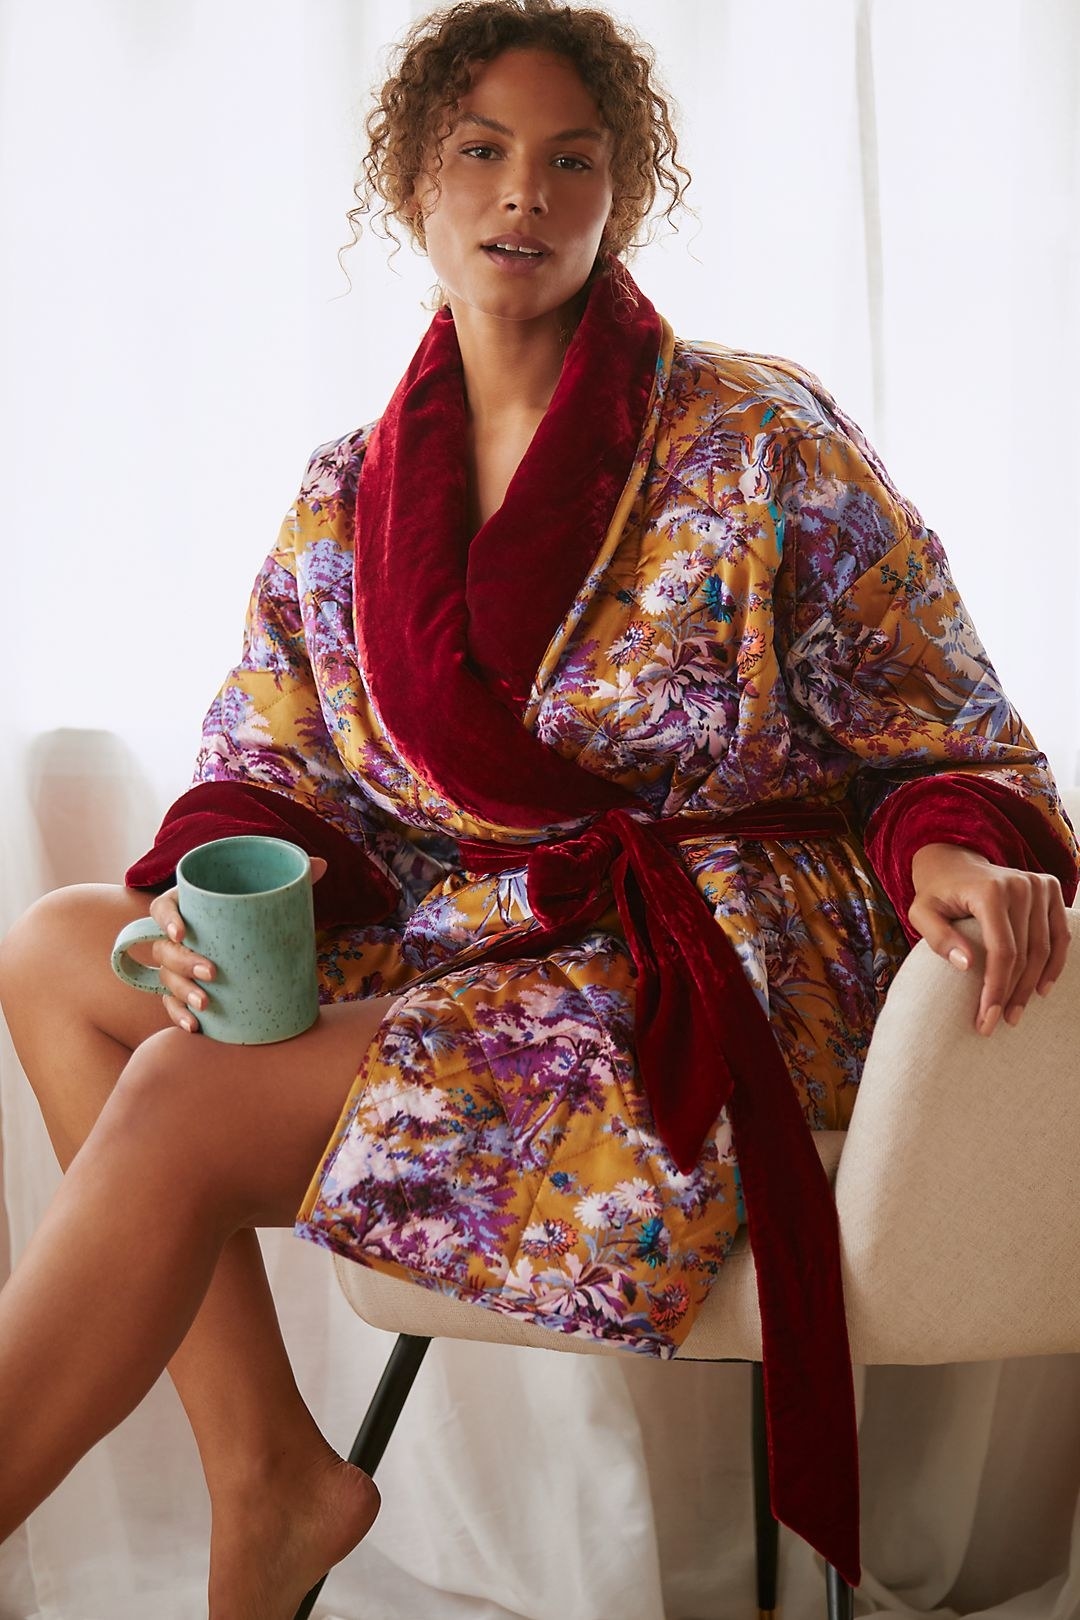 model in a short orange floral robe with red velvety trim and tie